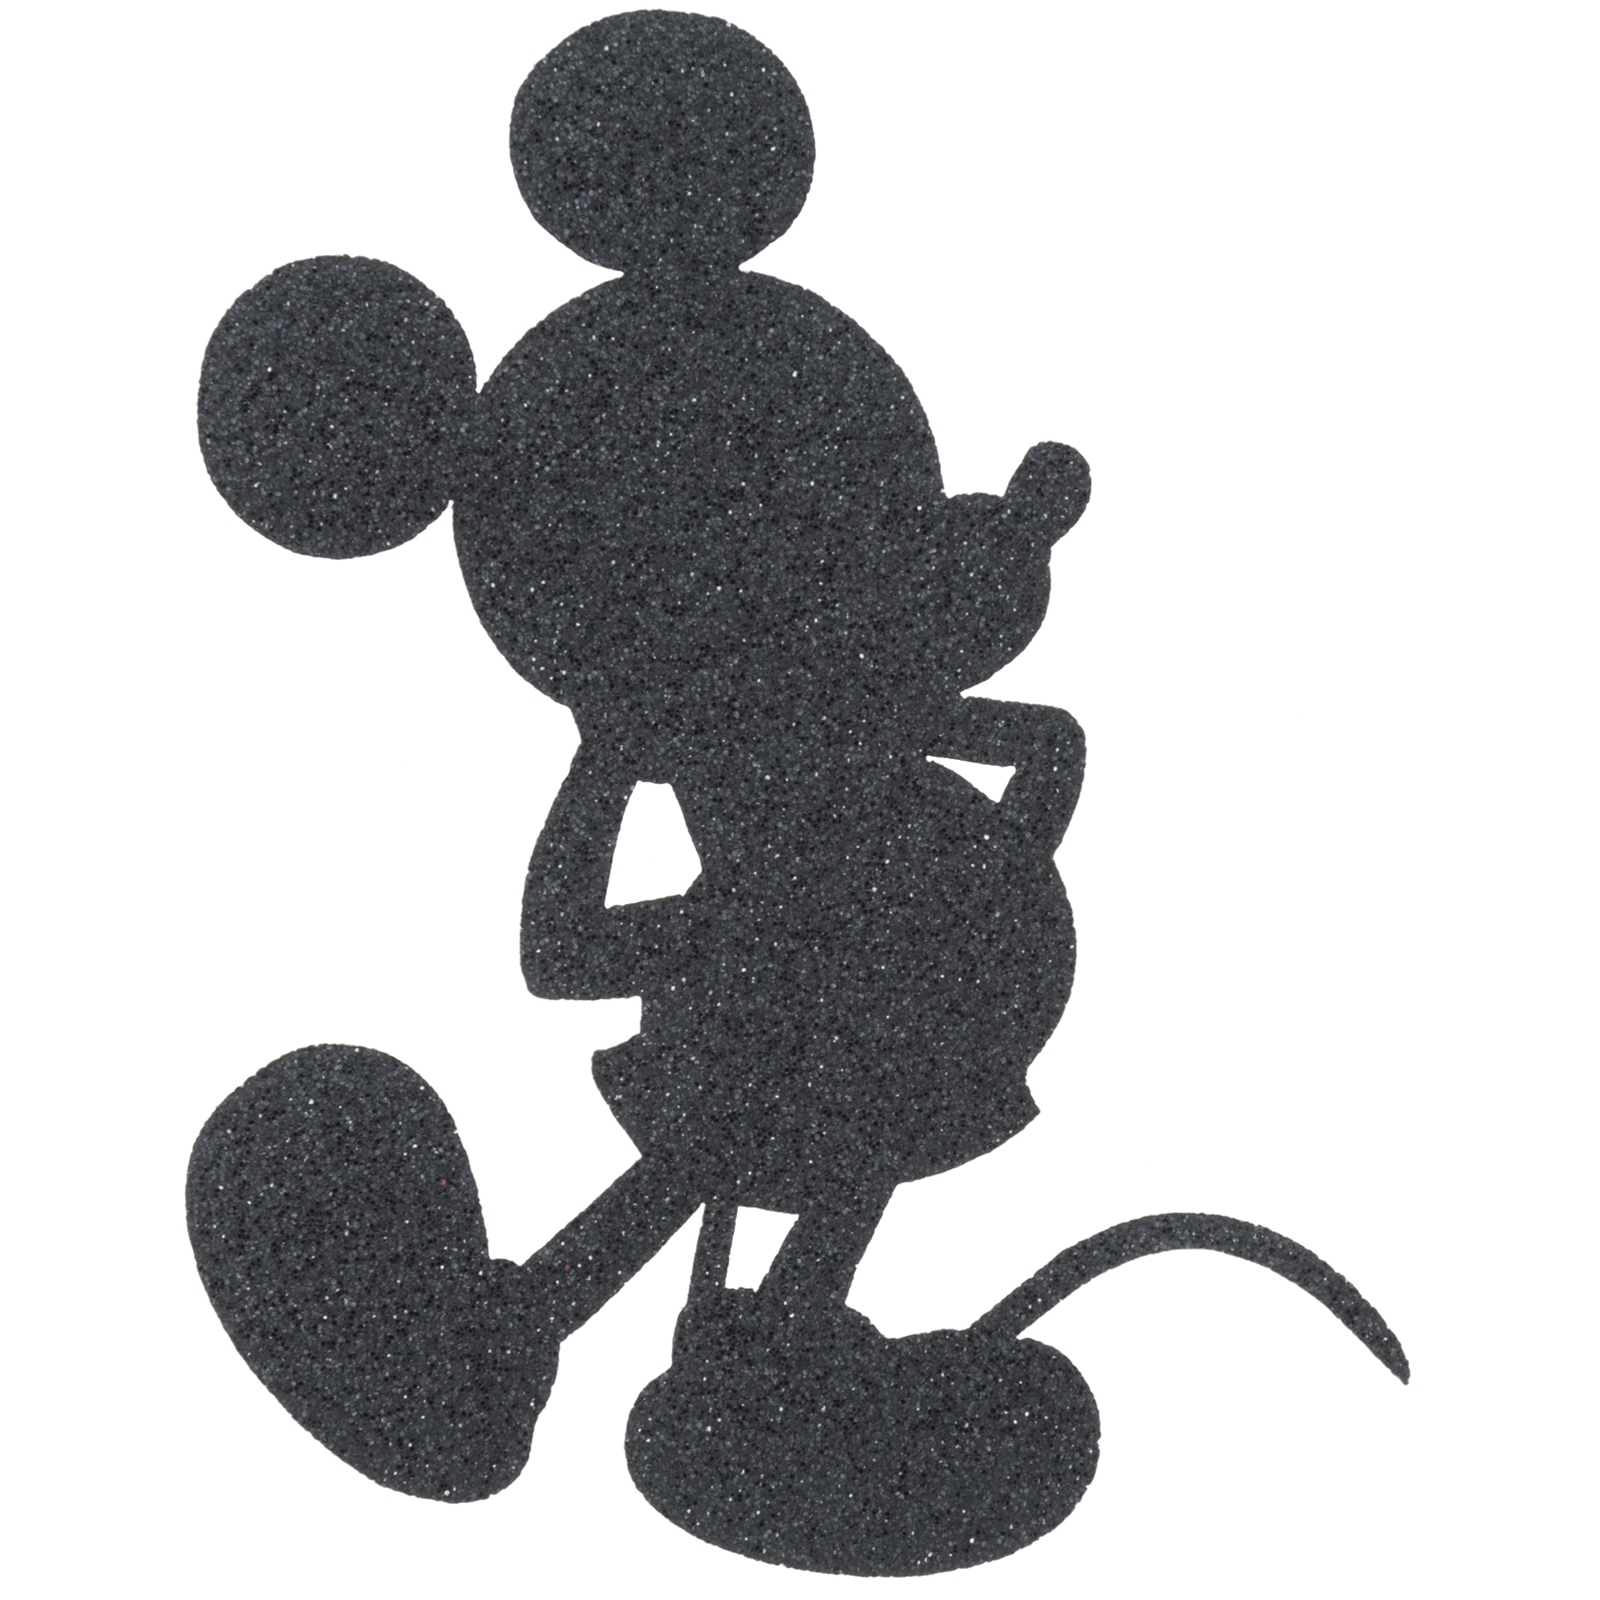 1600x1600 Find The Mickey Mouse Silhouette Small Iron On Applique.